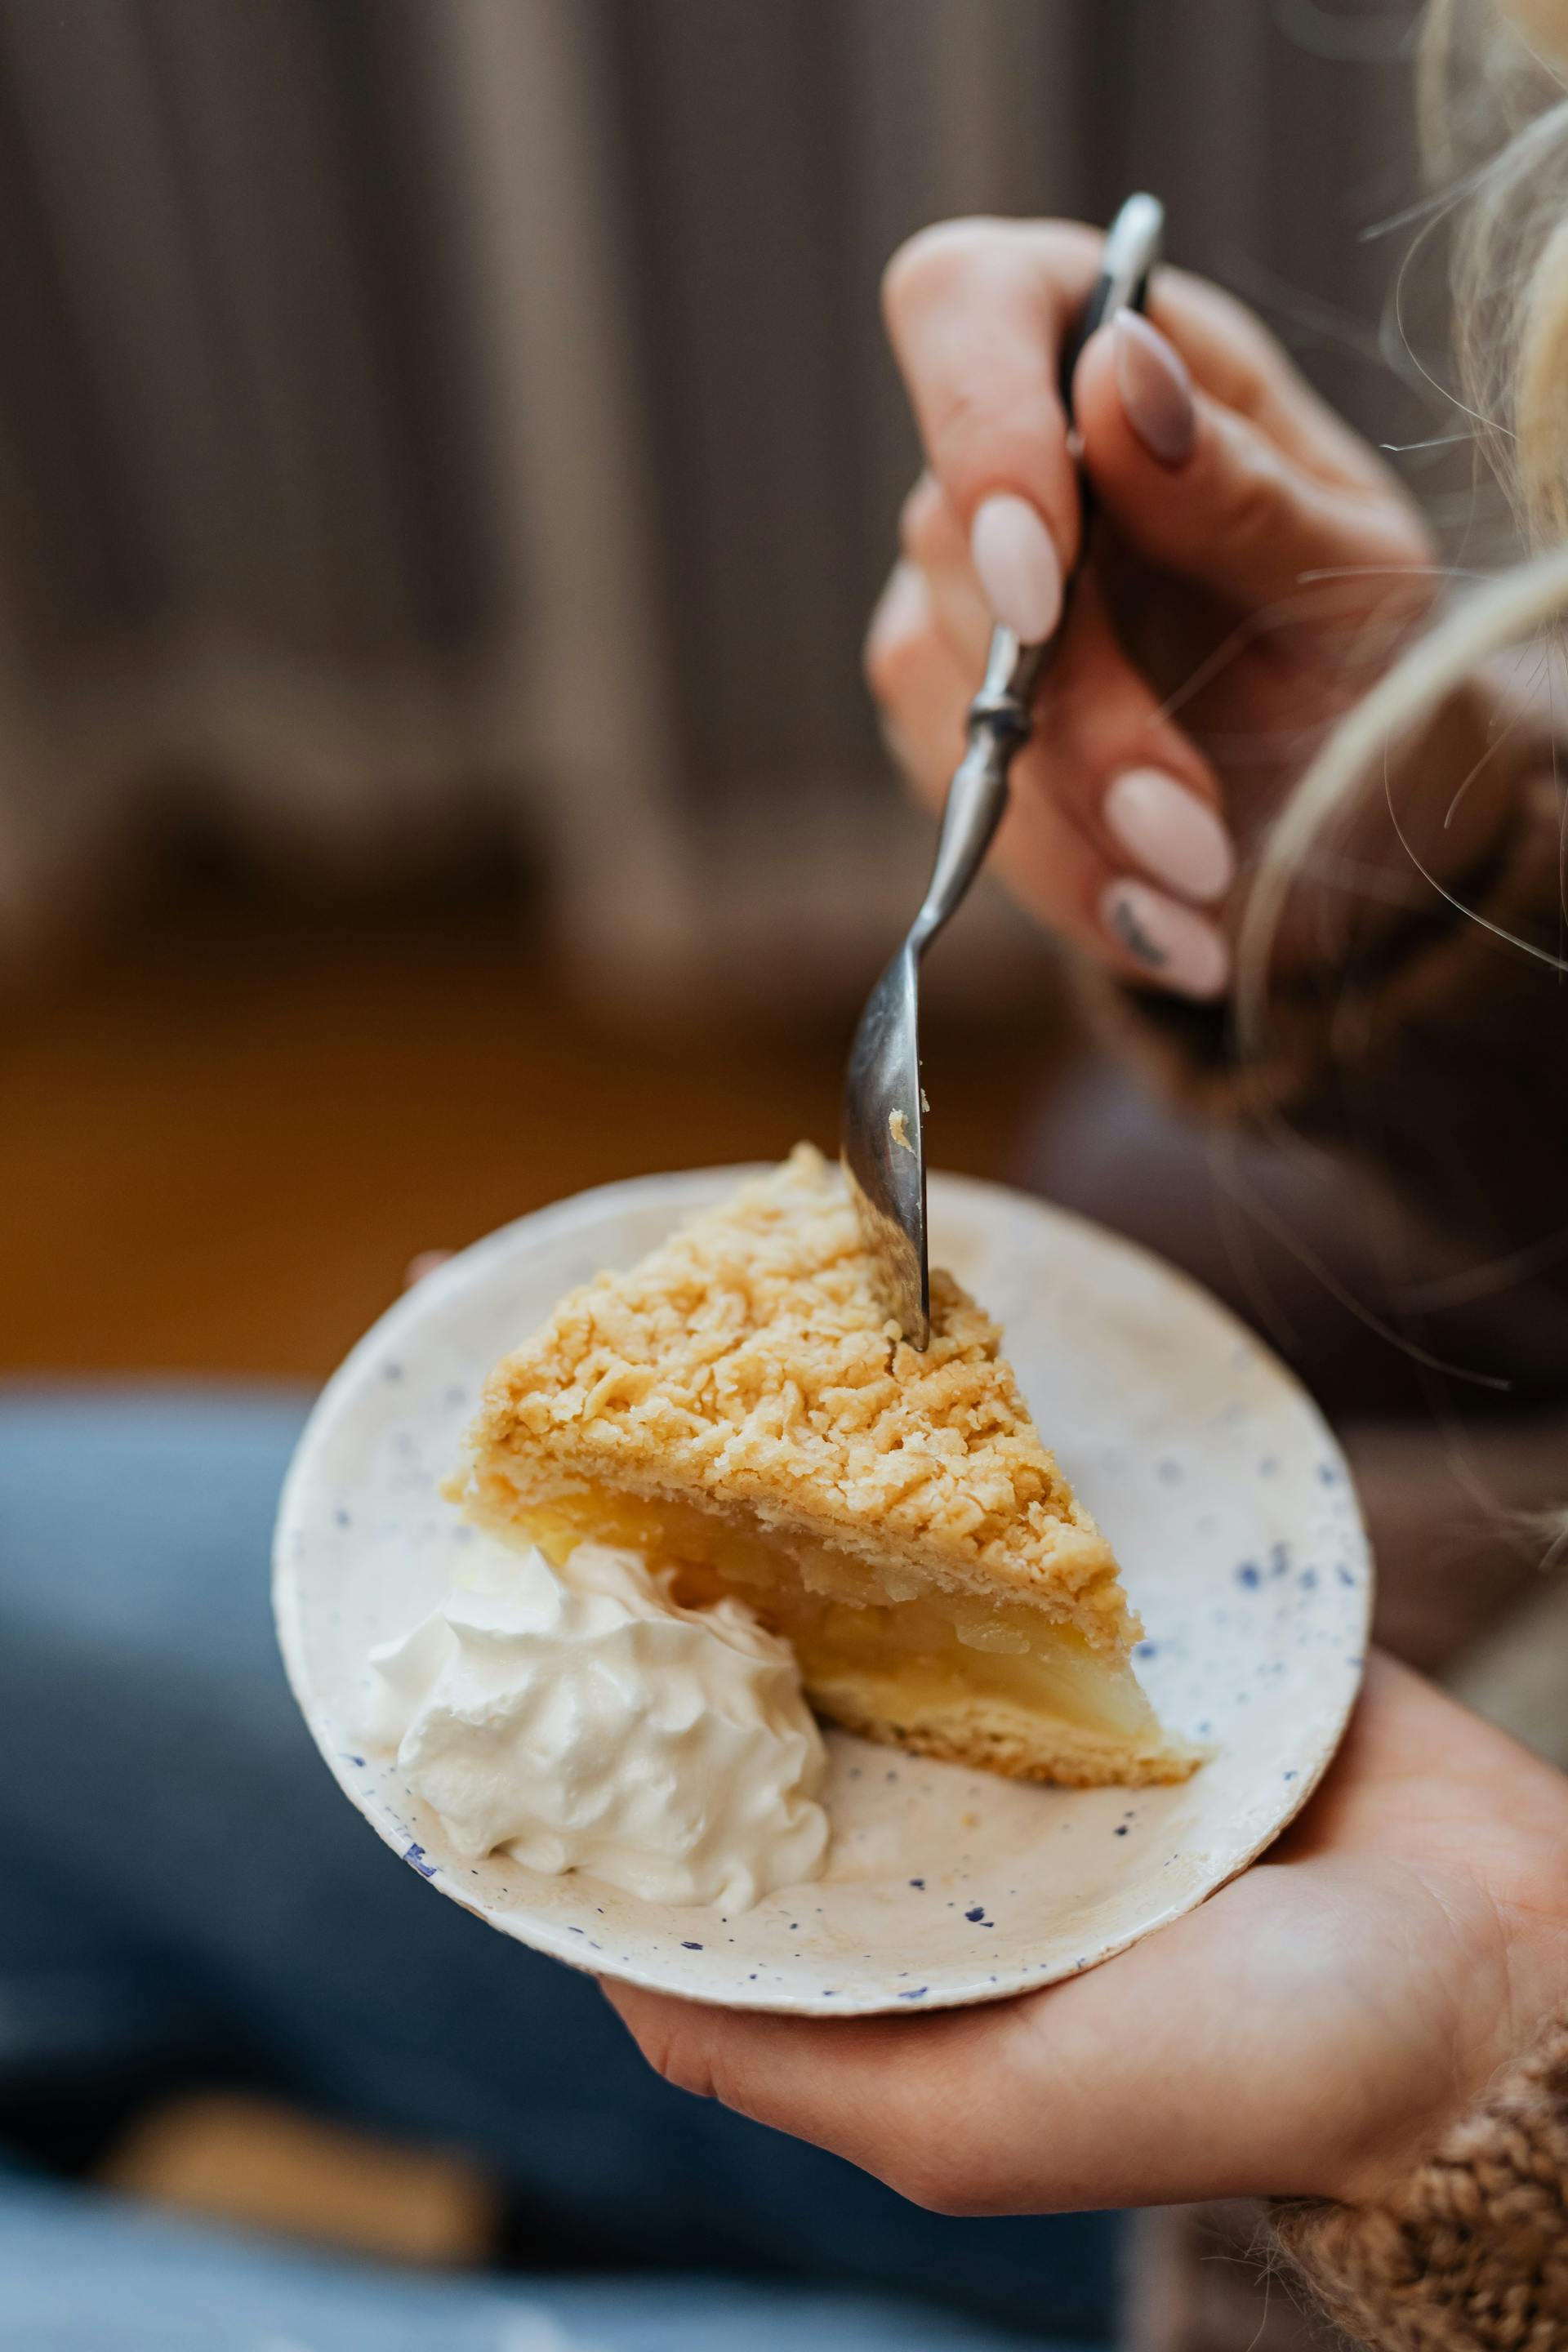 A person holding a slice of cake | Source: Pexels